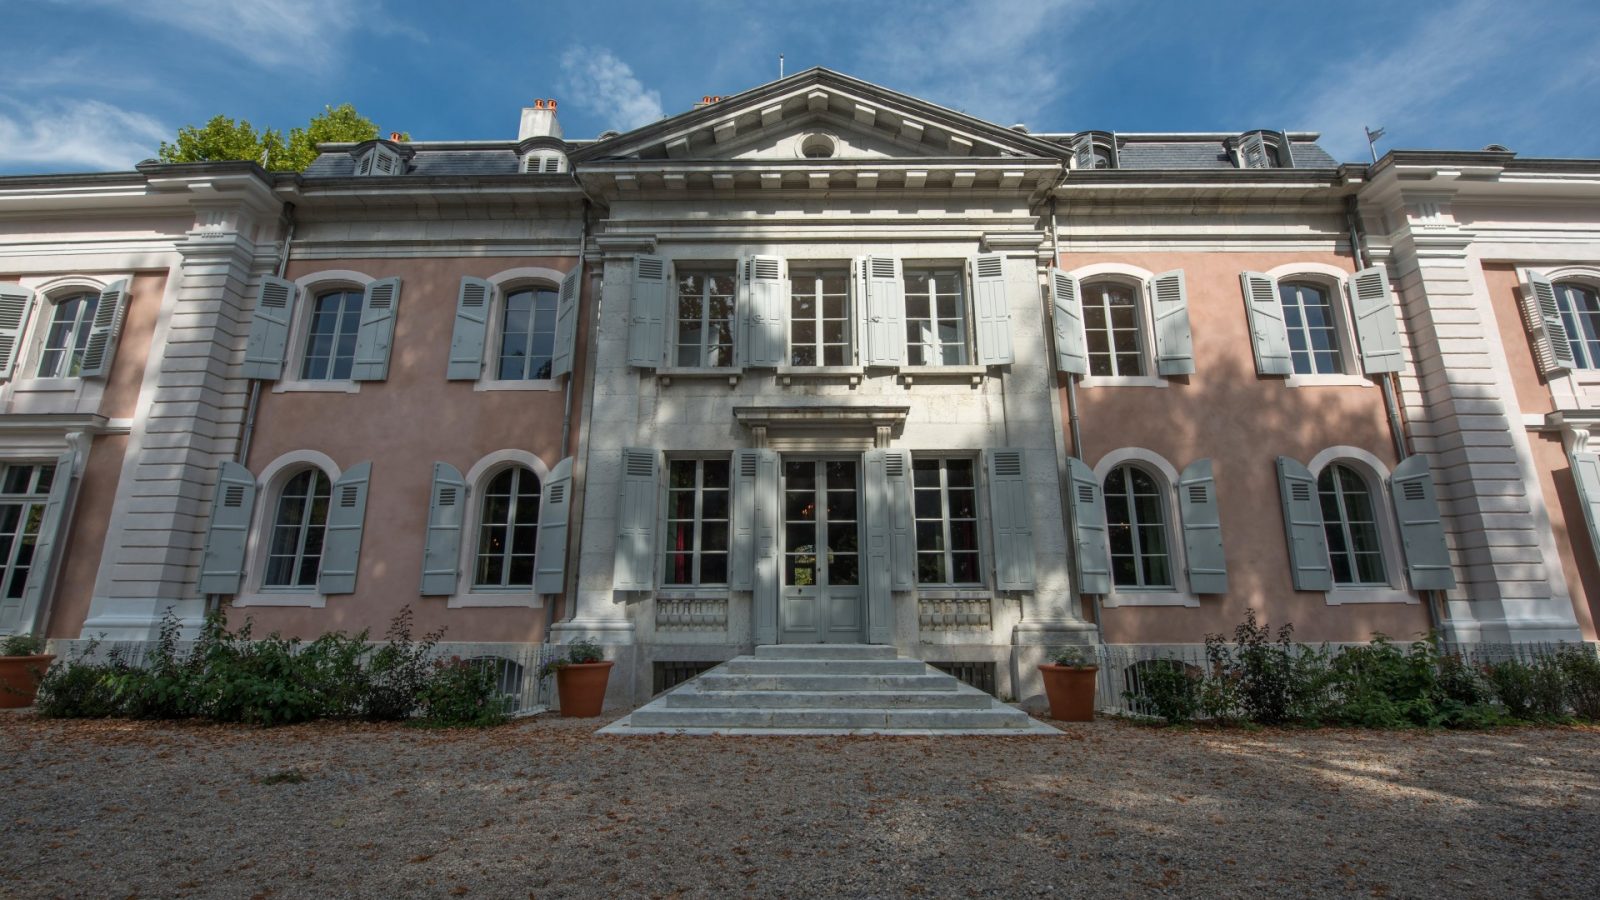 The château of Voltaire